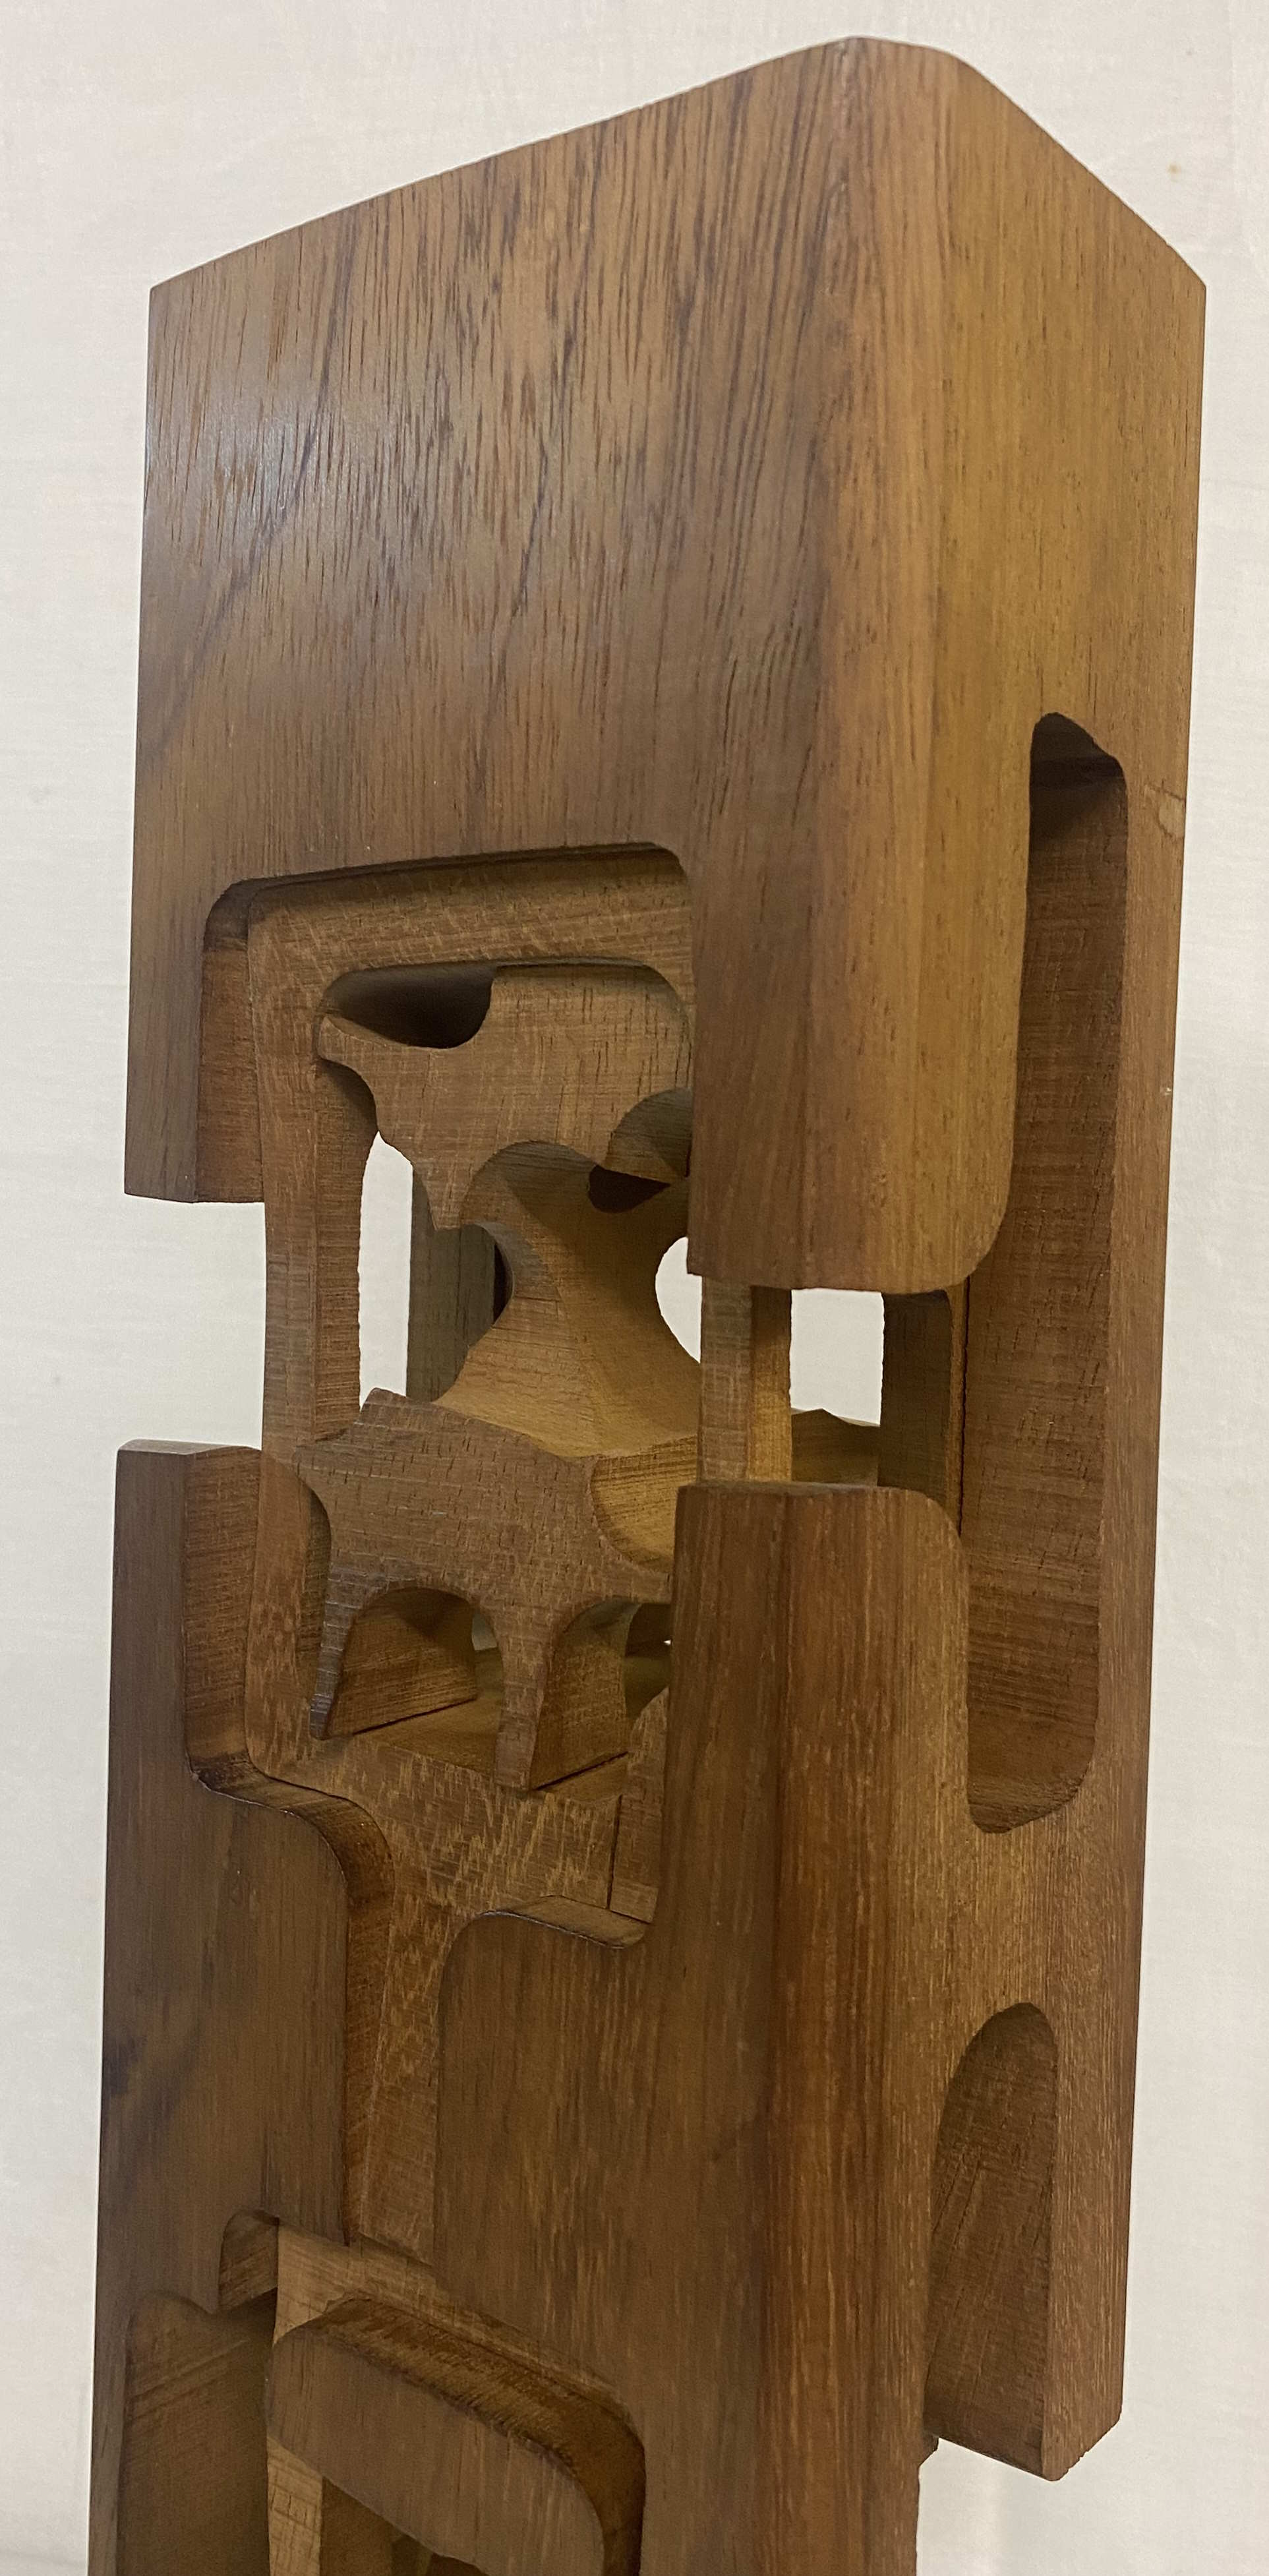 An abstract wooden sculpture attributed to Brian Willsher - Image 3 of 14